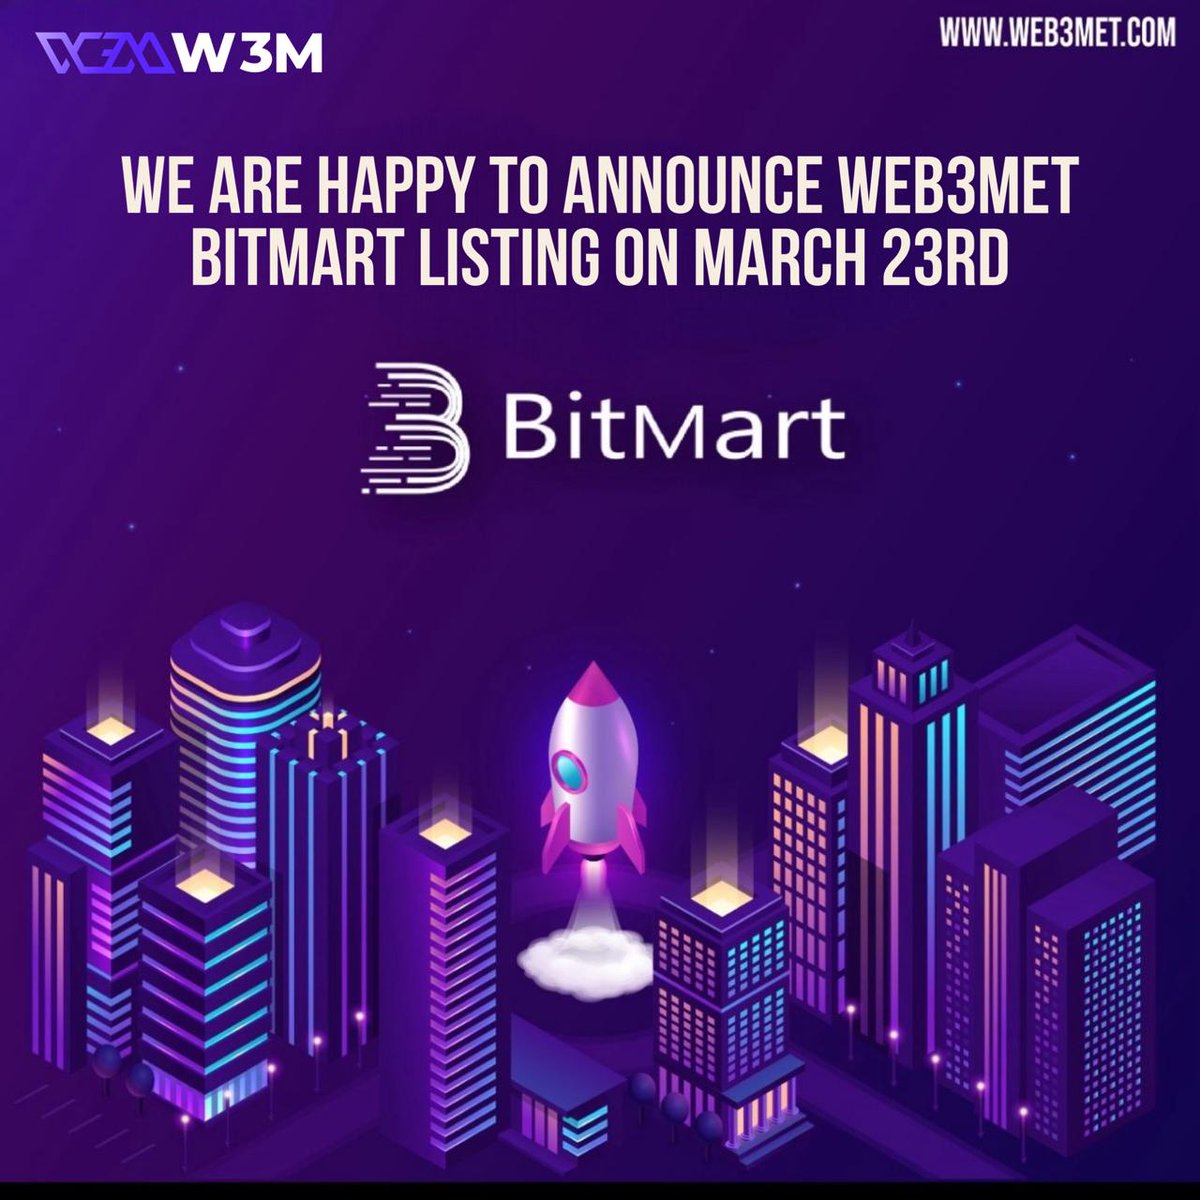 WE ARE HAPPY TO ANNOUNCE WEB3MET BITMART LISTING ON MARCH 23RD